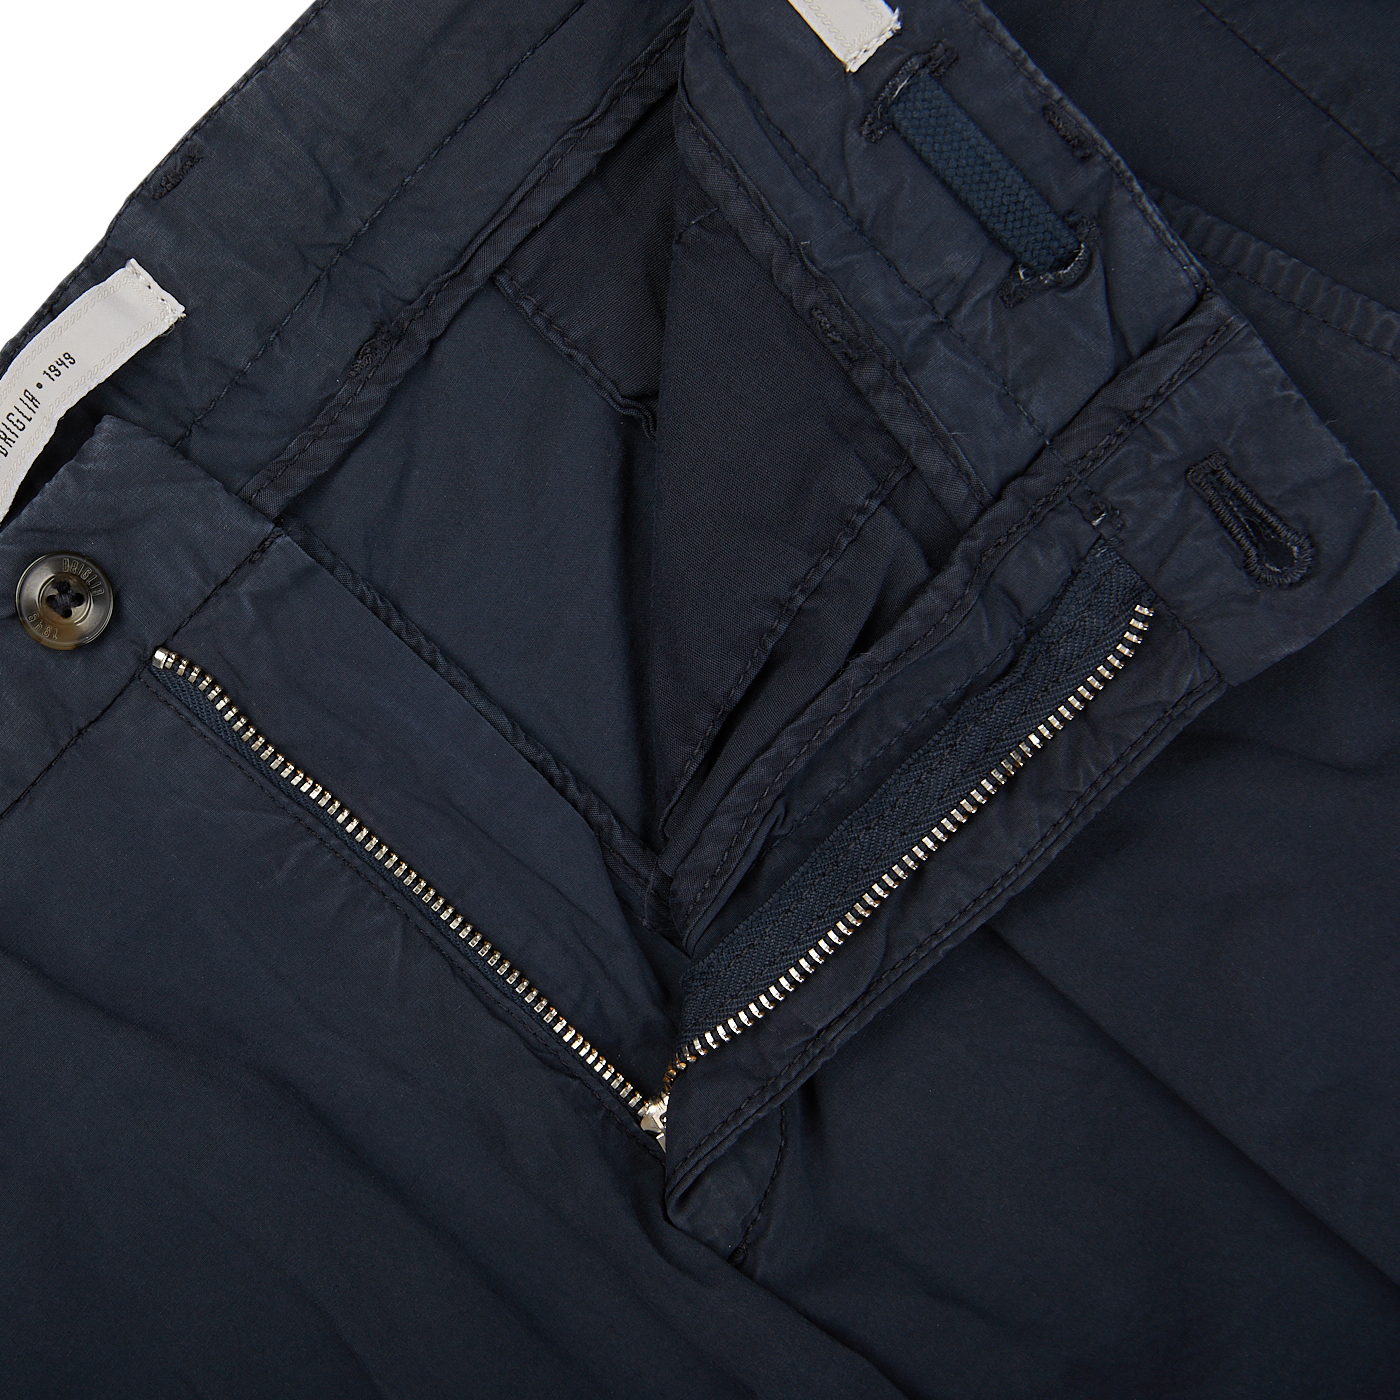 Close-up of Briglia navy blue cotton drawstring Malibu shorts with a zipper detail, button closure, and an adjustable waistband.